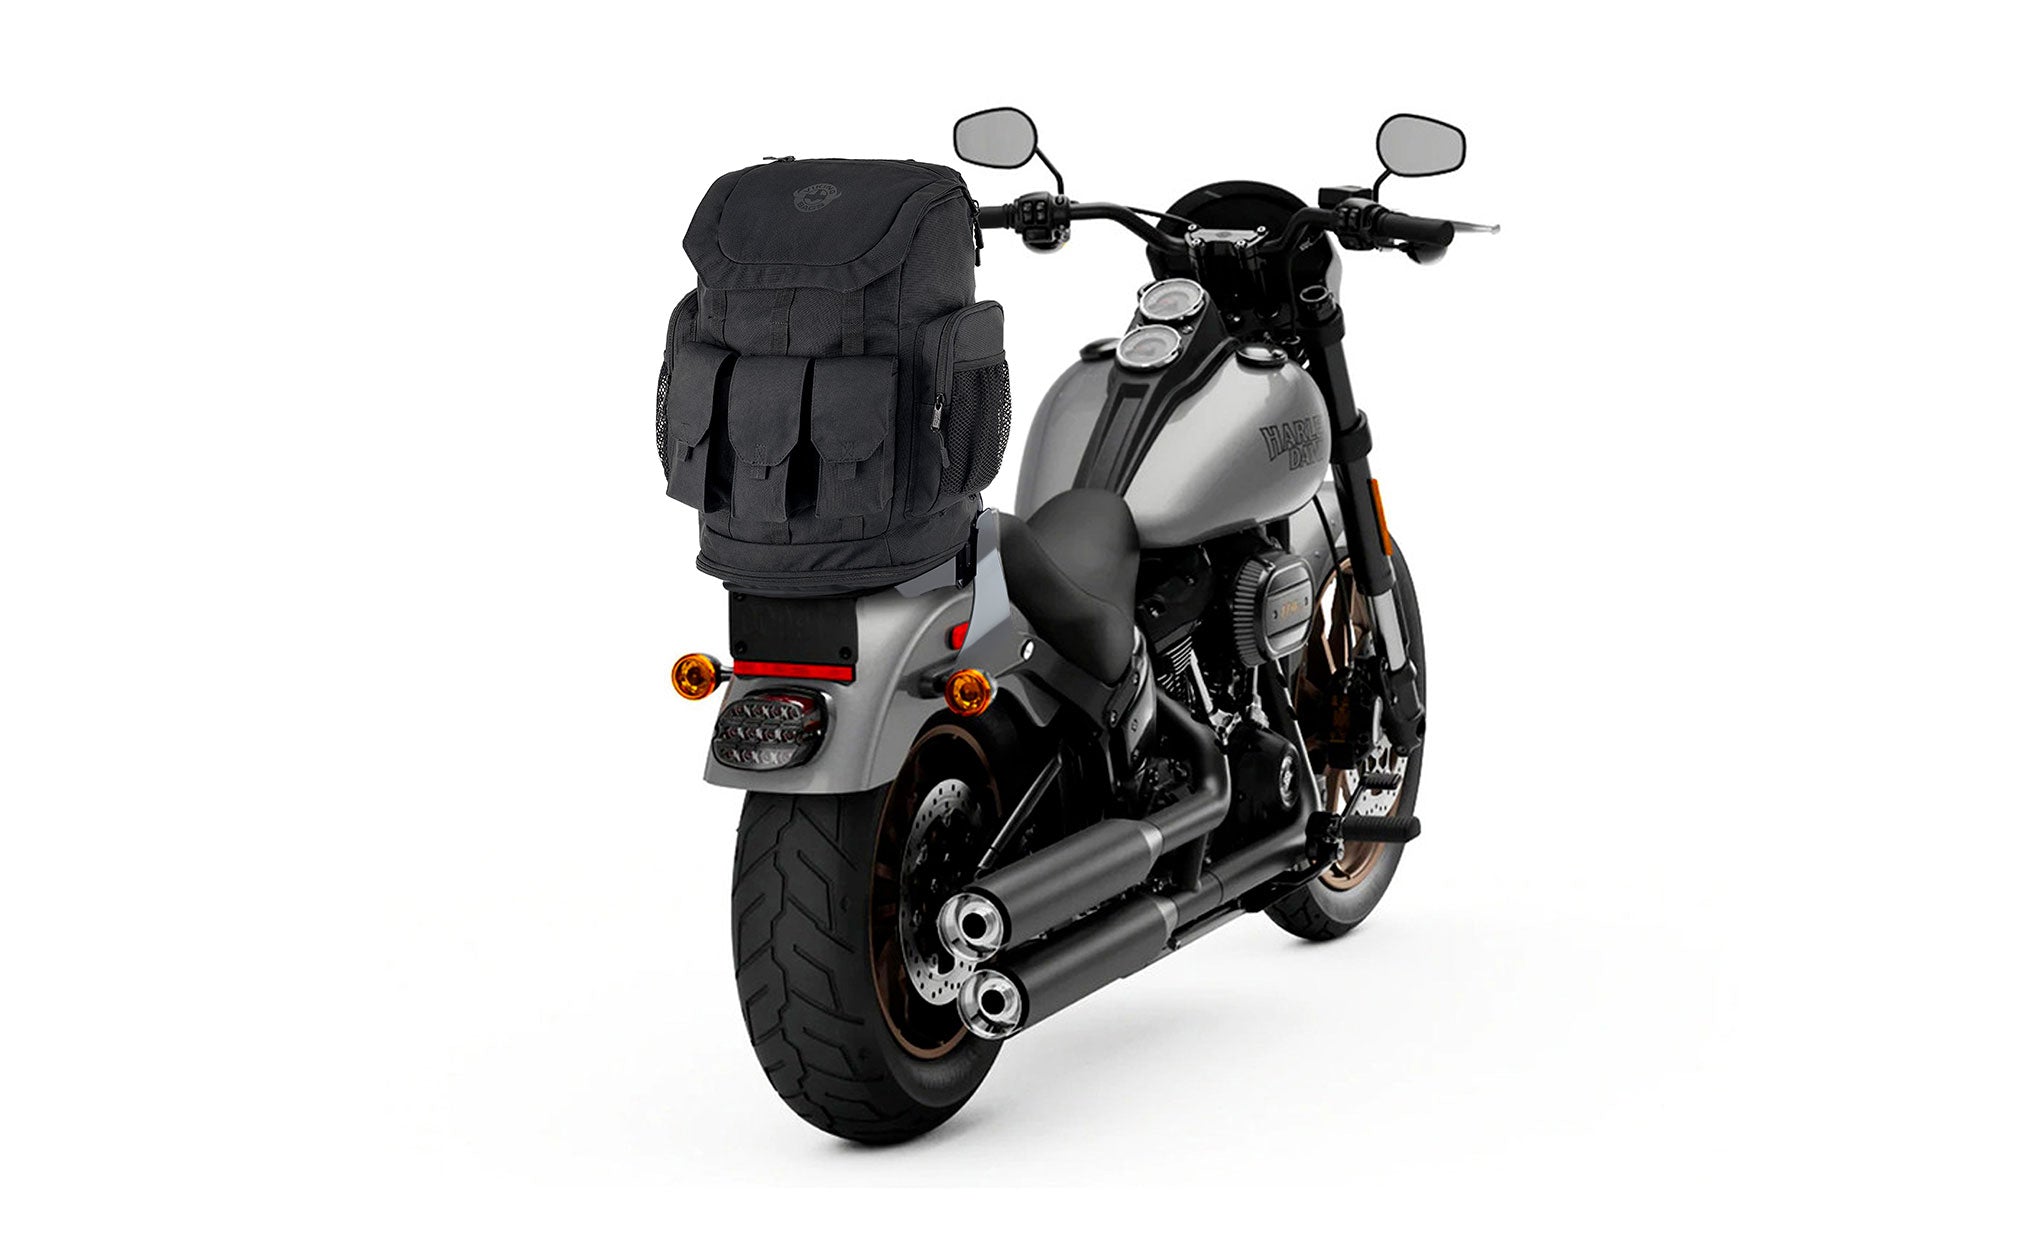 Viking Trident XL Hyosung Motorcycle Sissy Bar Backpack Bag on Bike View @expand